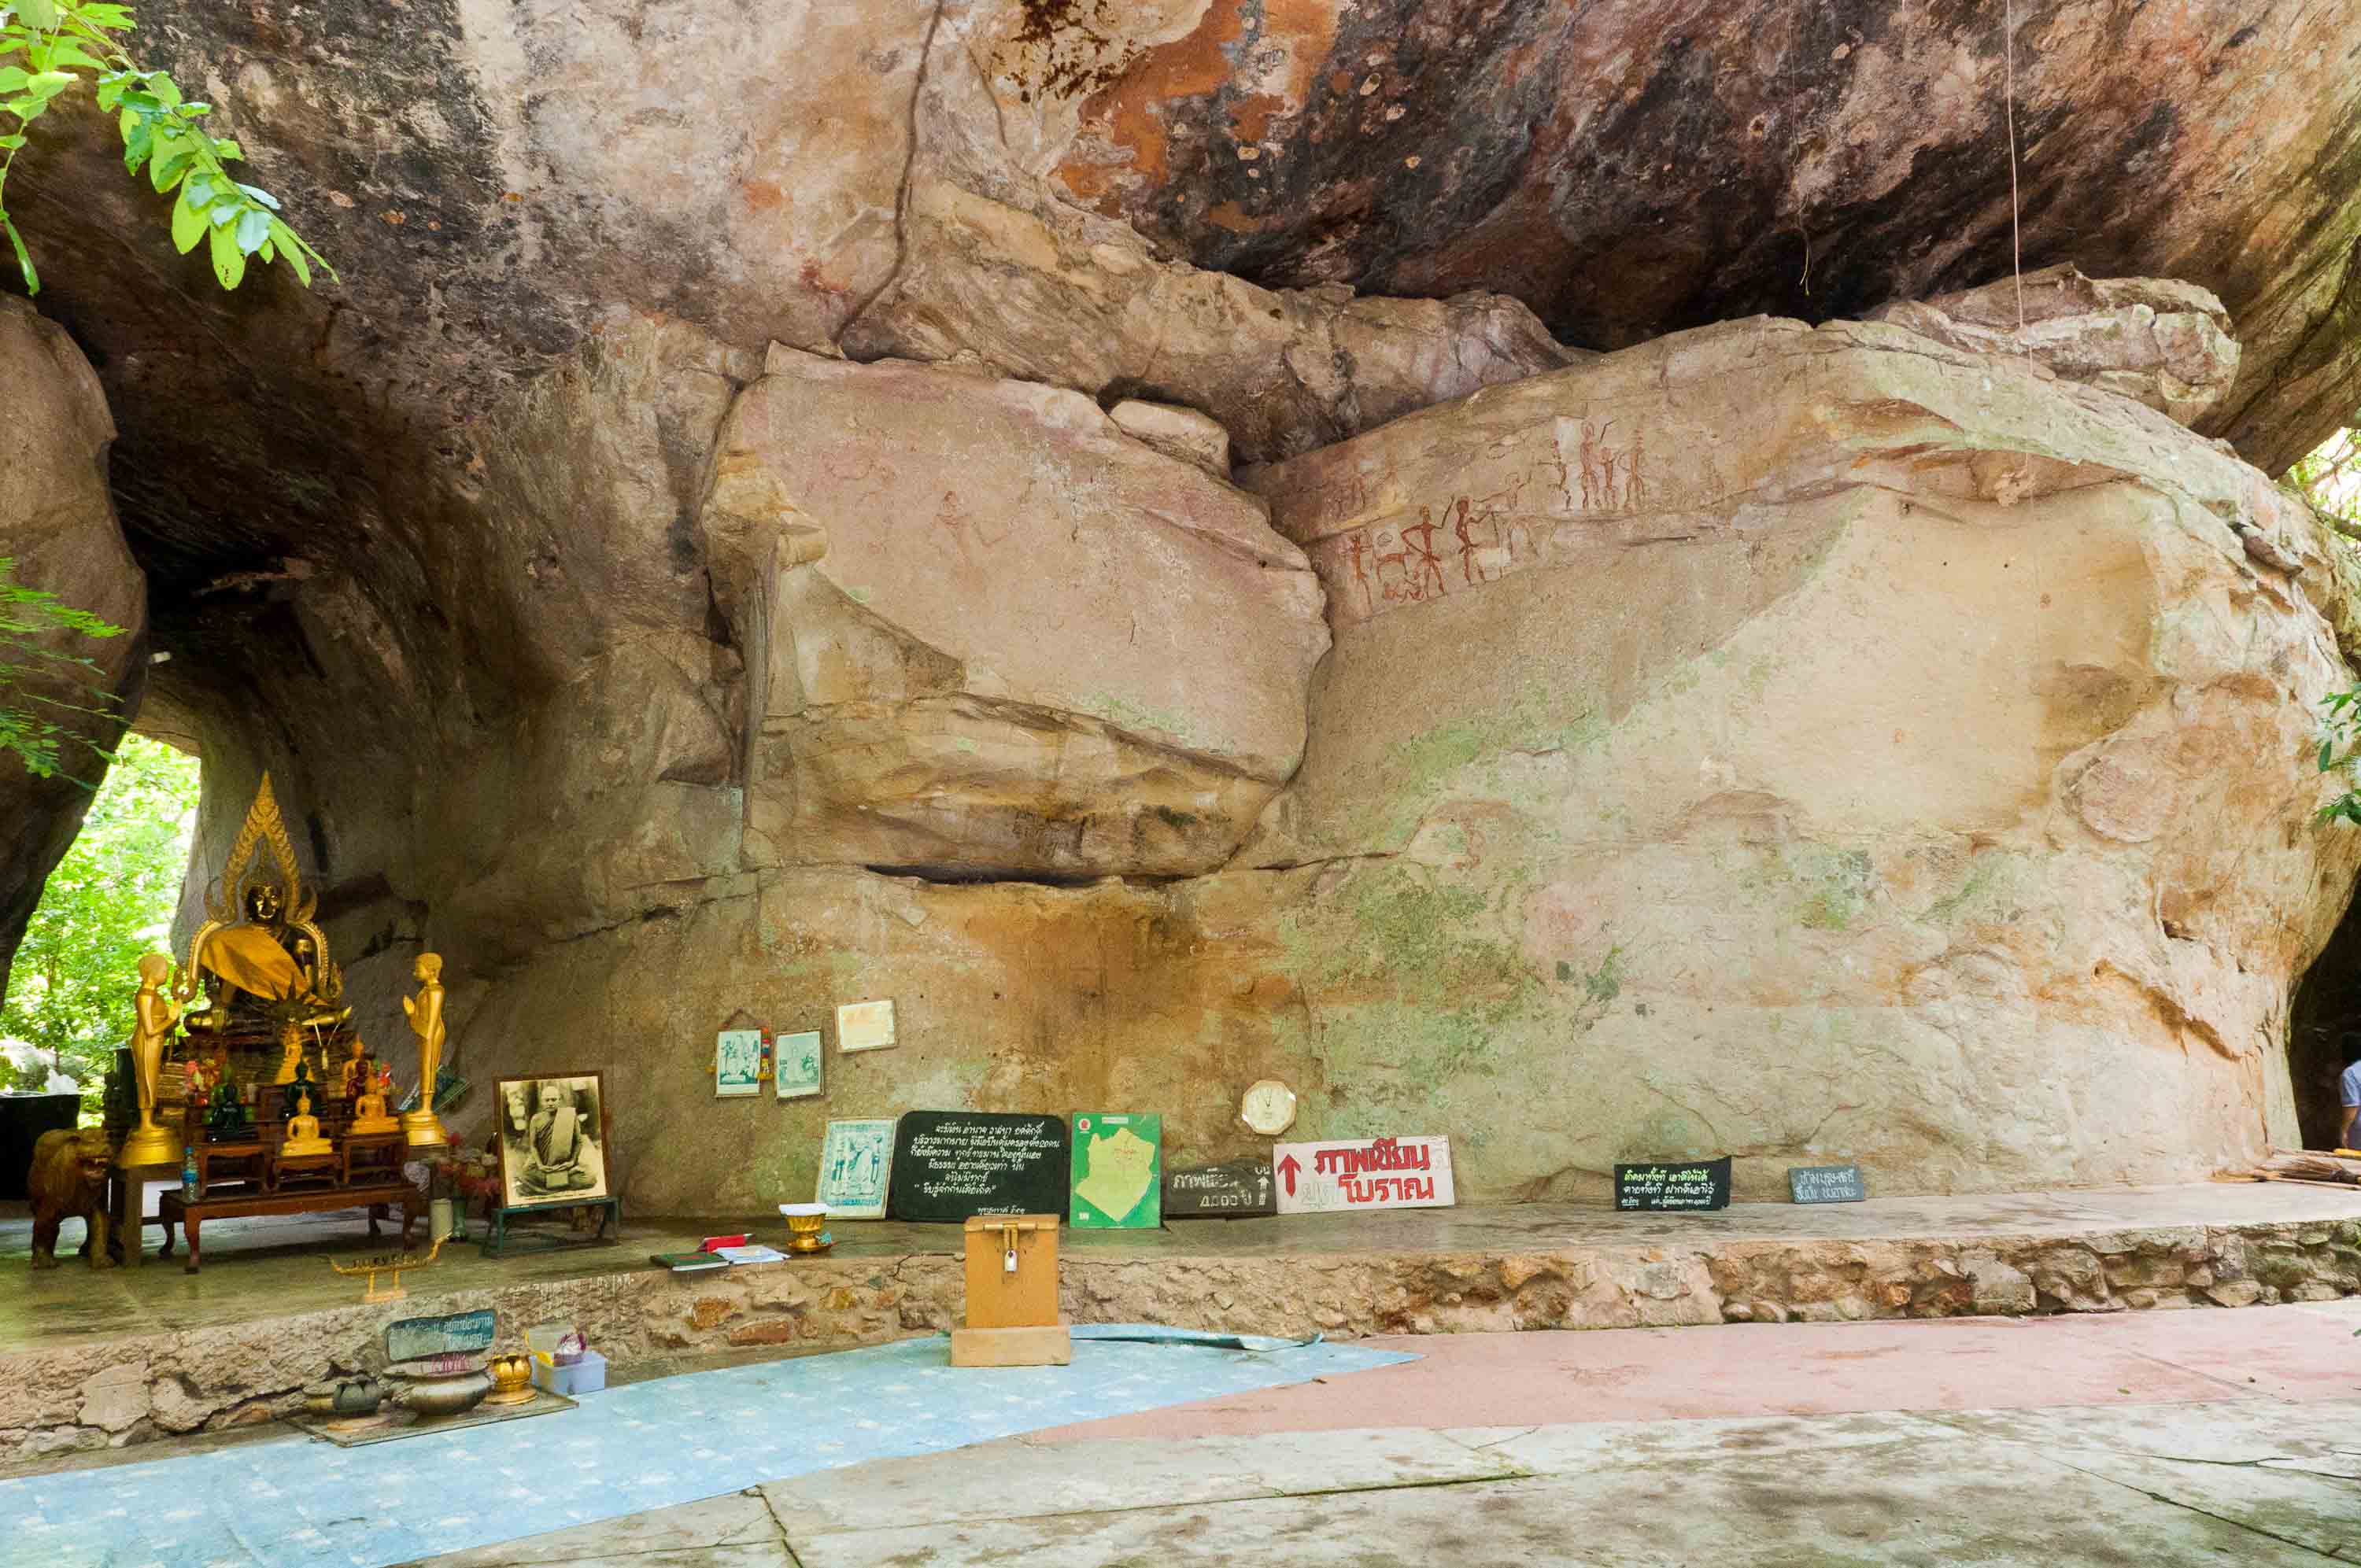 Emerging Consciousness and New Media: The Management of Rock Art in Southeast Asia and New Opportunities for Communicating Its Significance